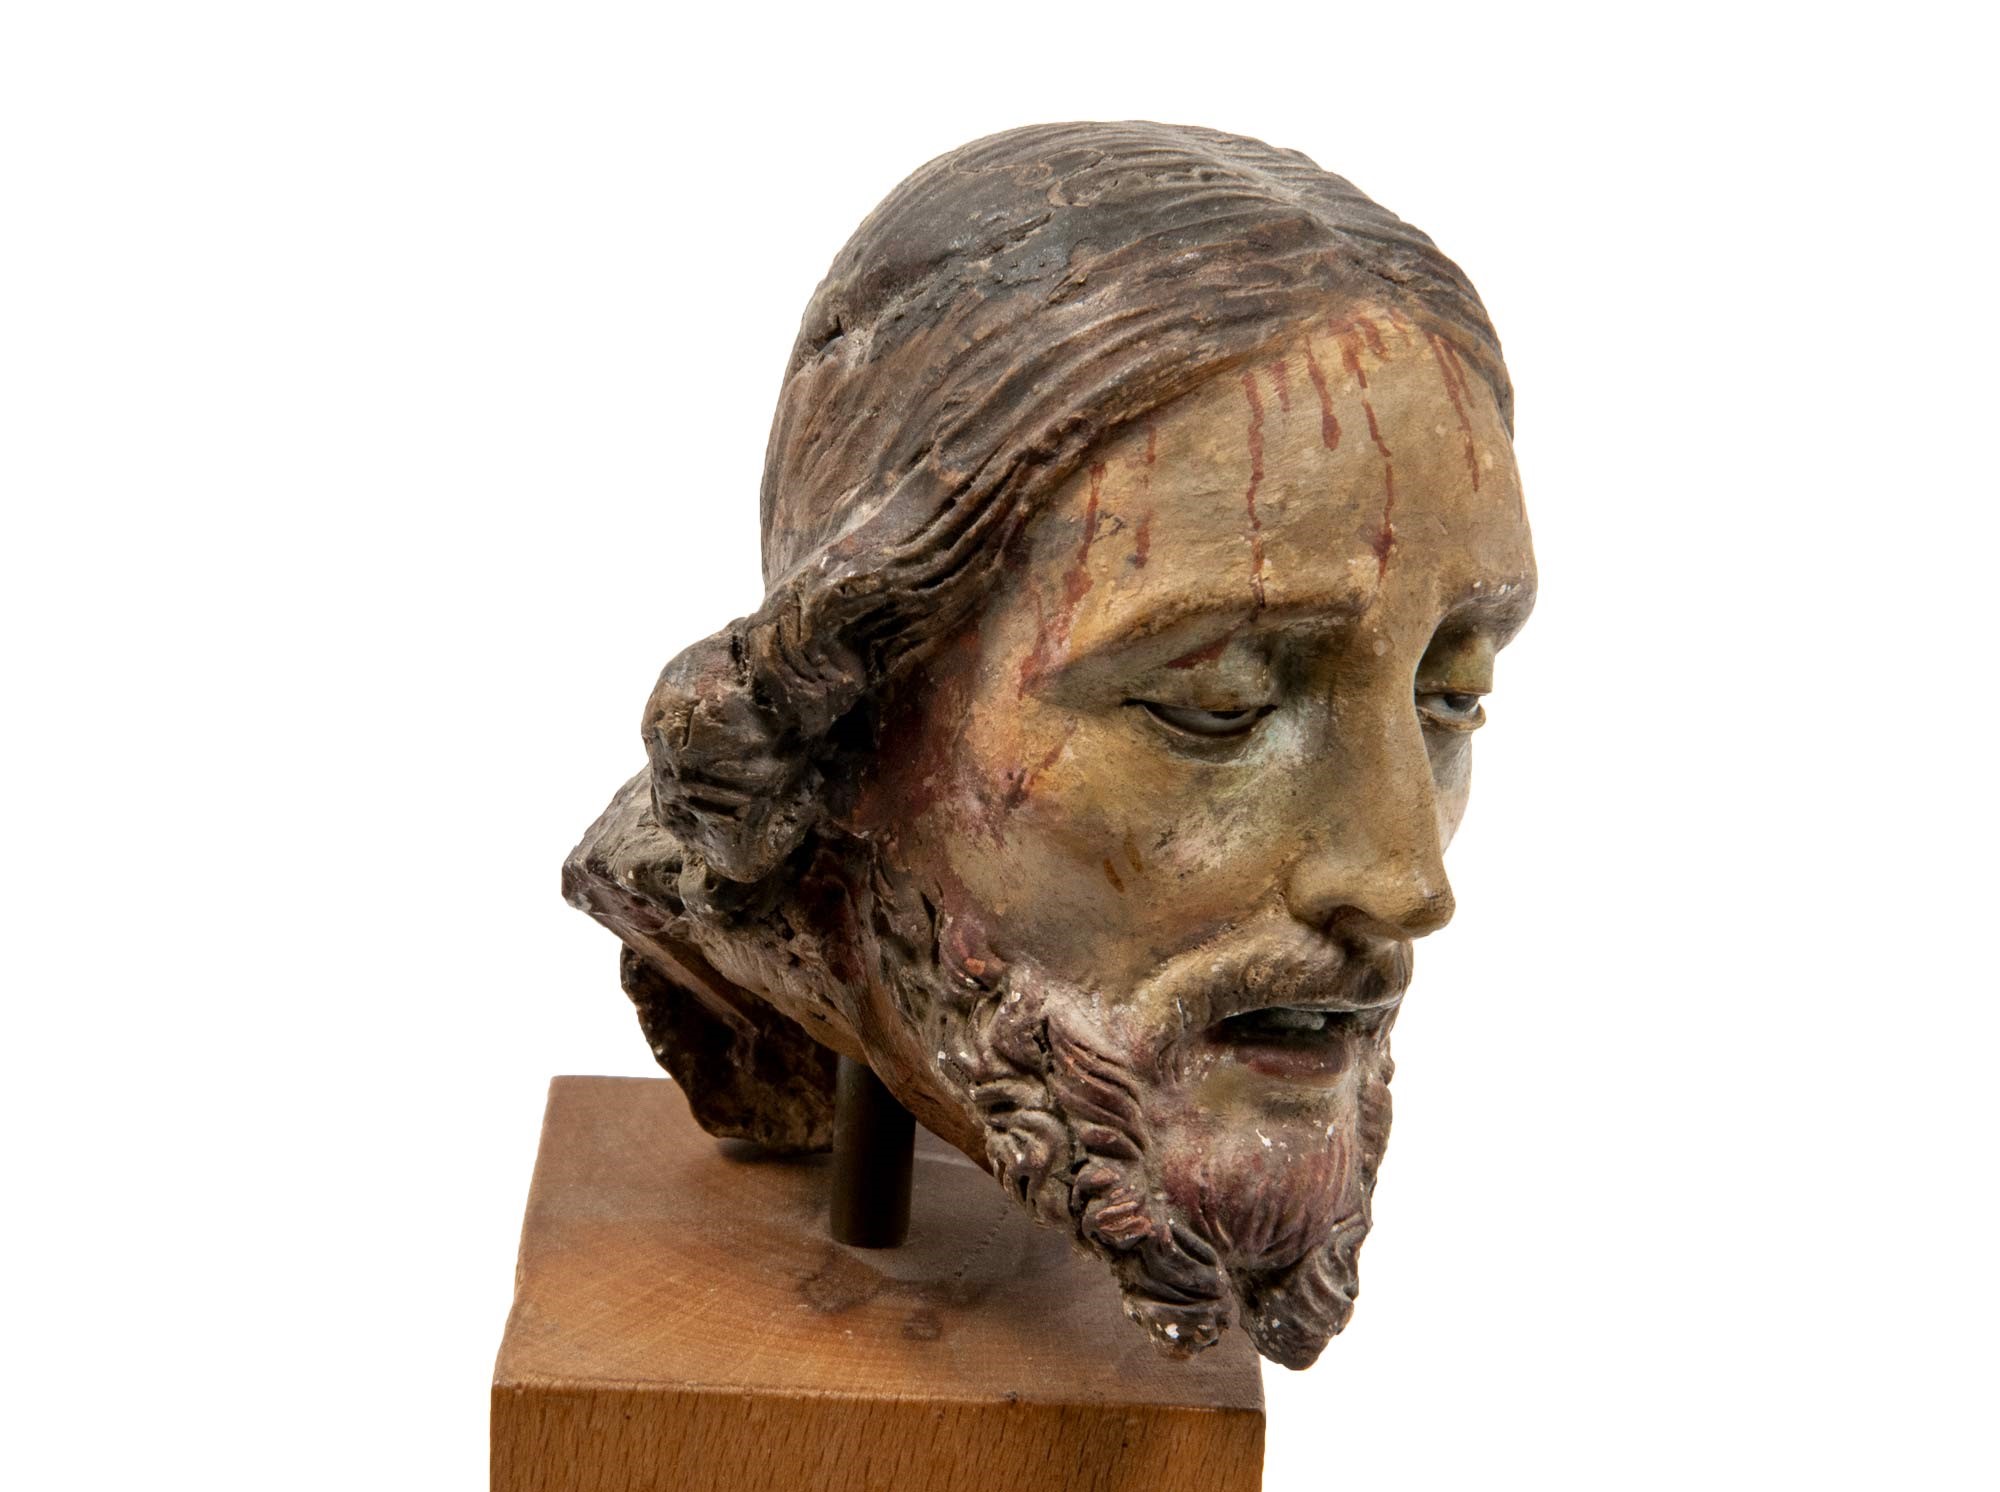 Painted terracotta head of Christ manifacture veneta, 18th century, on the wooden baseh 21 cm - Image 5 of 6